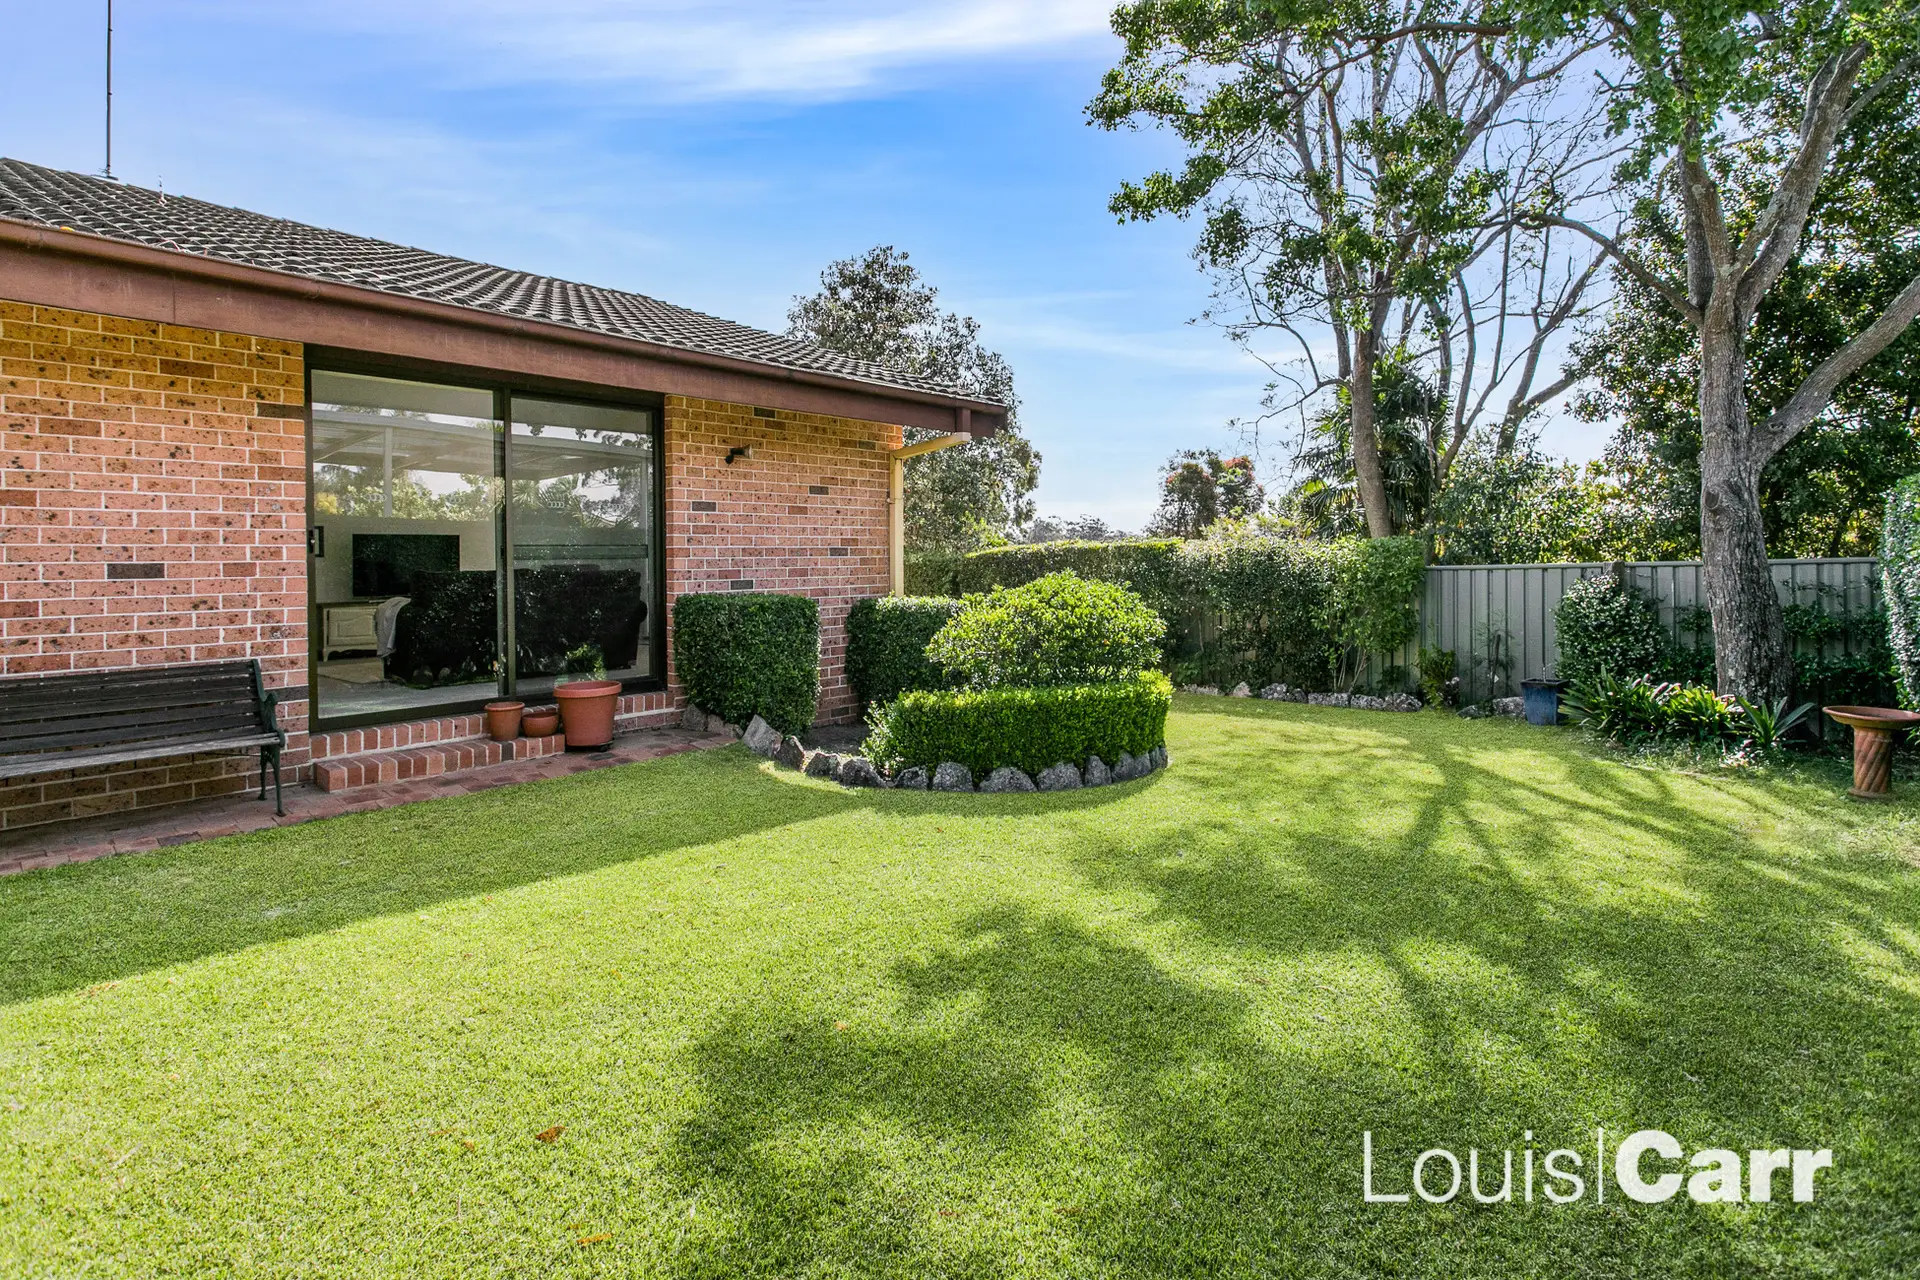 Photo #5: 11 Kentia Parade, Cherrybrook - Sold by Louis Carr Real Estate